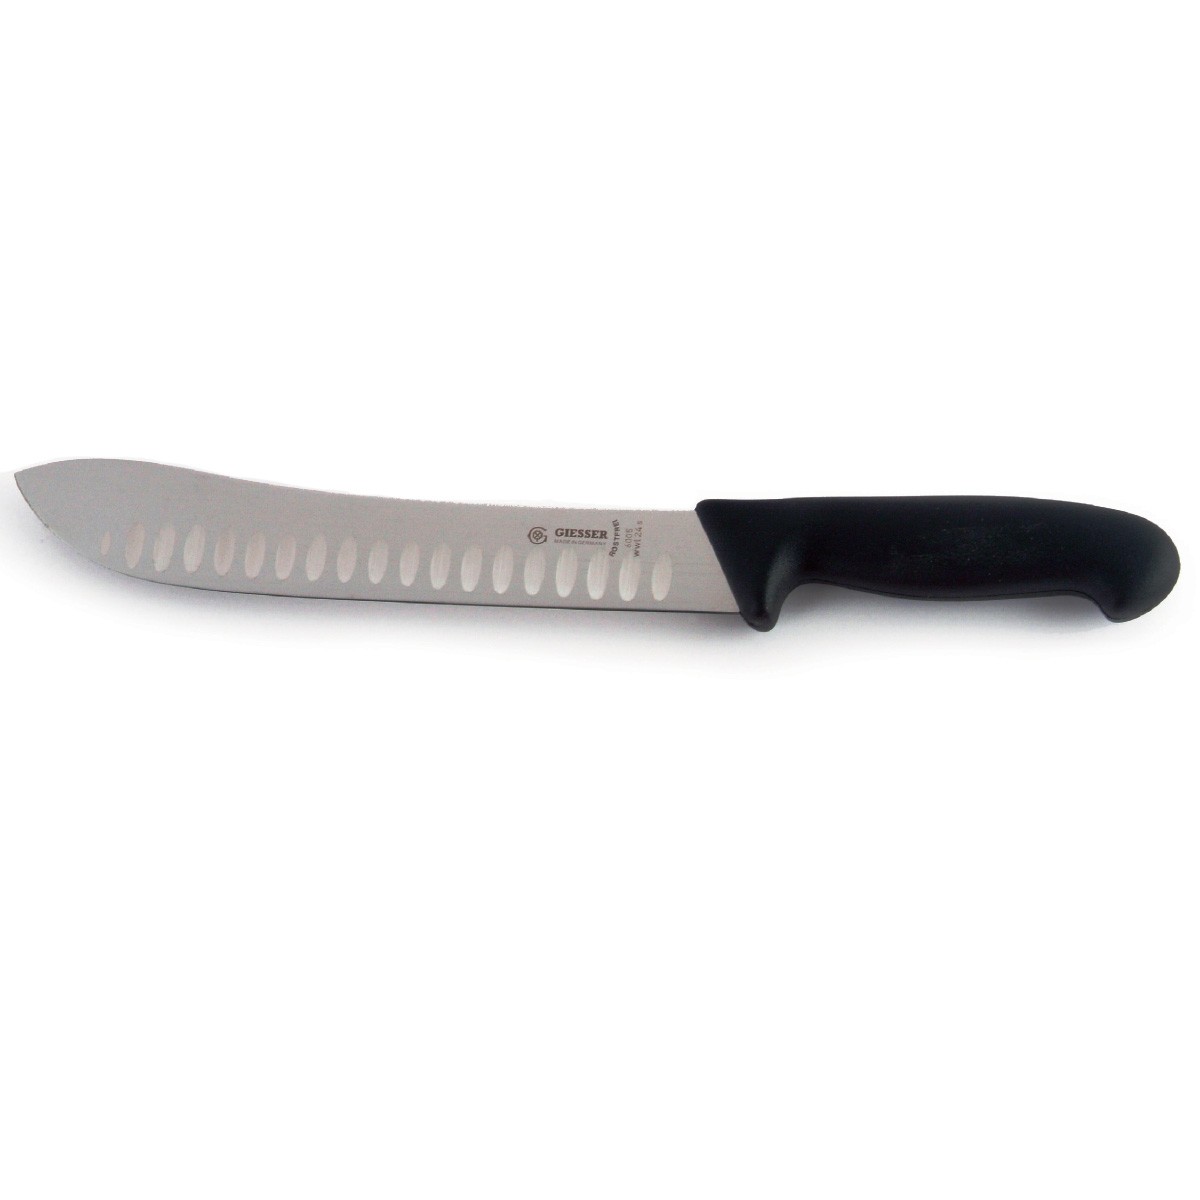 Giesser Butcher Knives  UltraSource food equipment and industrial